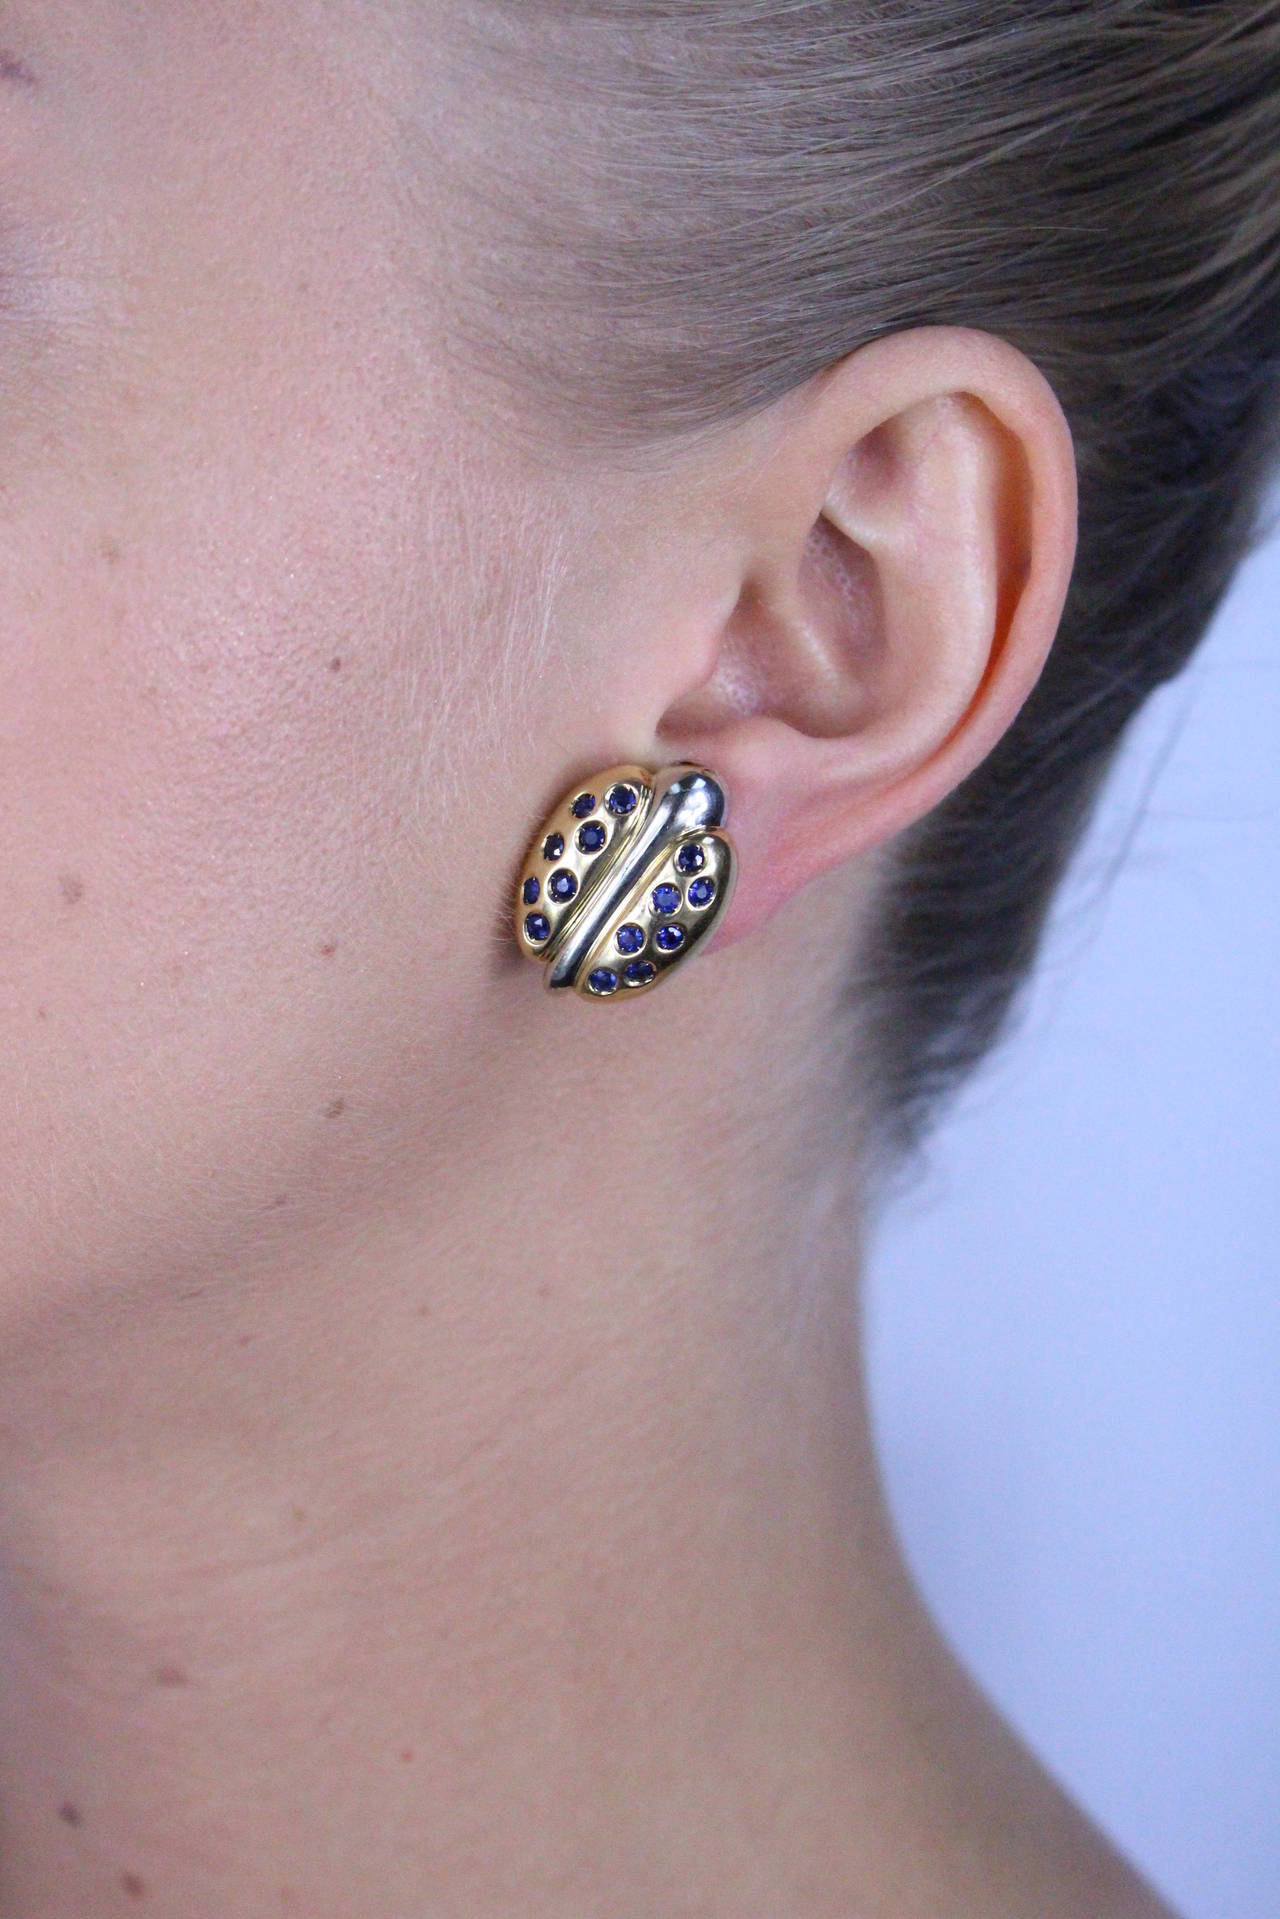 Faraone Lady Bug ear clips set with 28 round sapphires weighing approximately 1.40 carats. With Faraone and Italian stamps.

Metal Type: 18Kt Yellow Gold
Metal Weight: 14.8 Grams